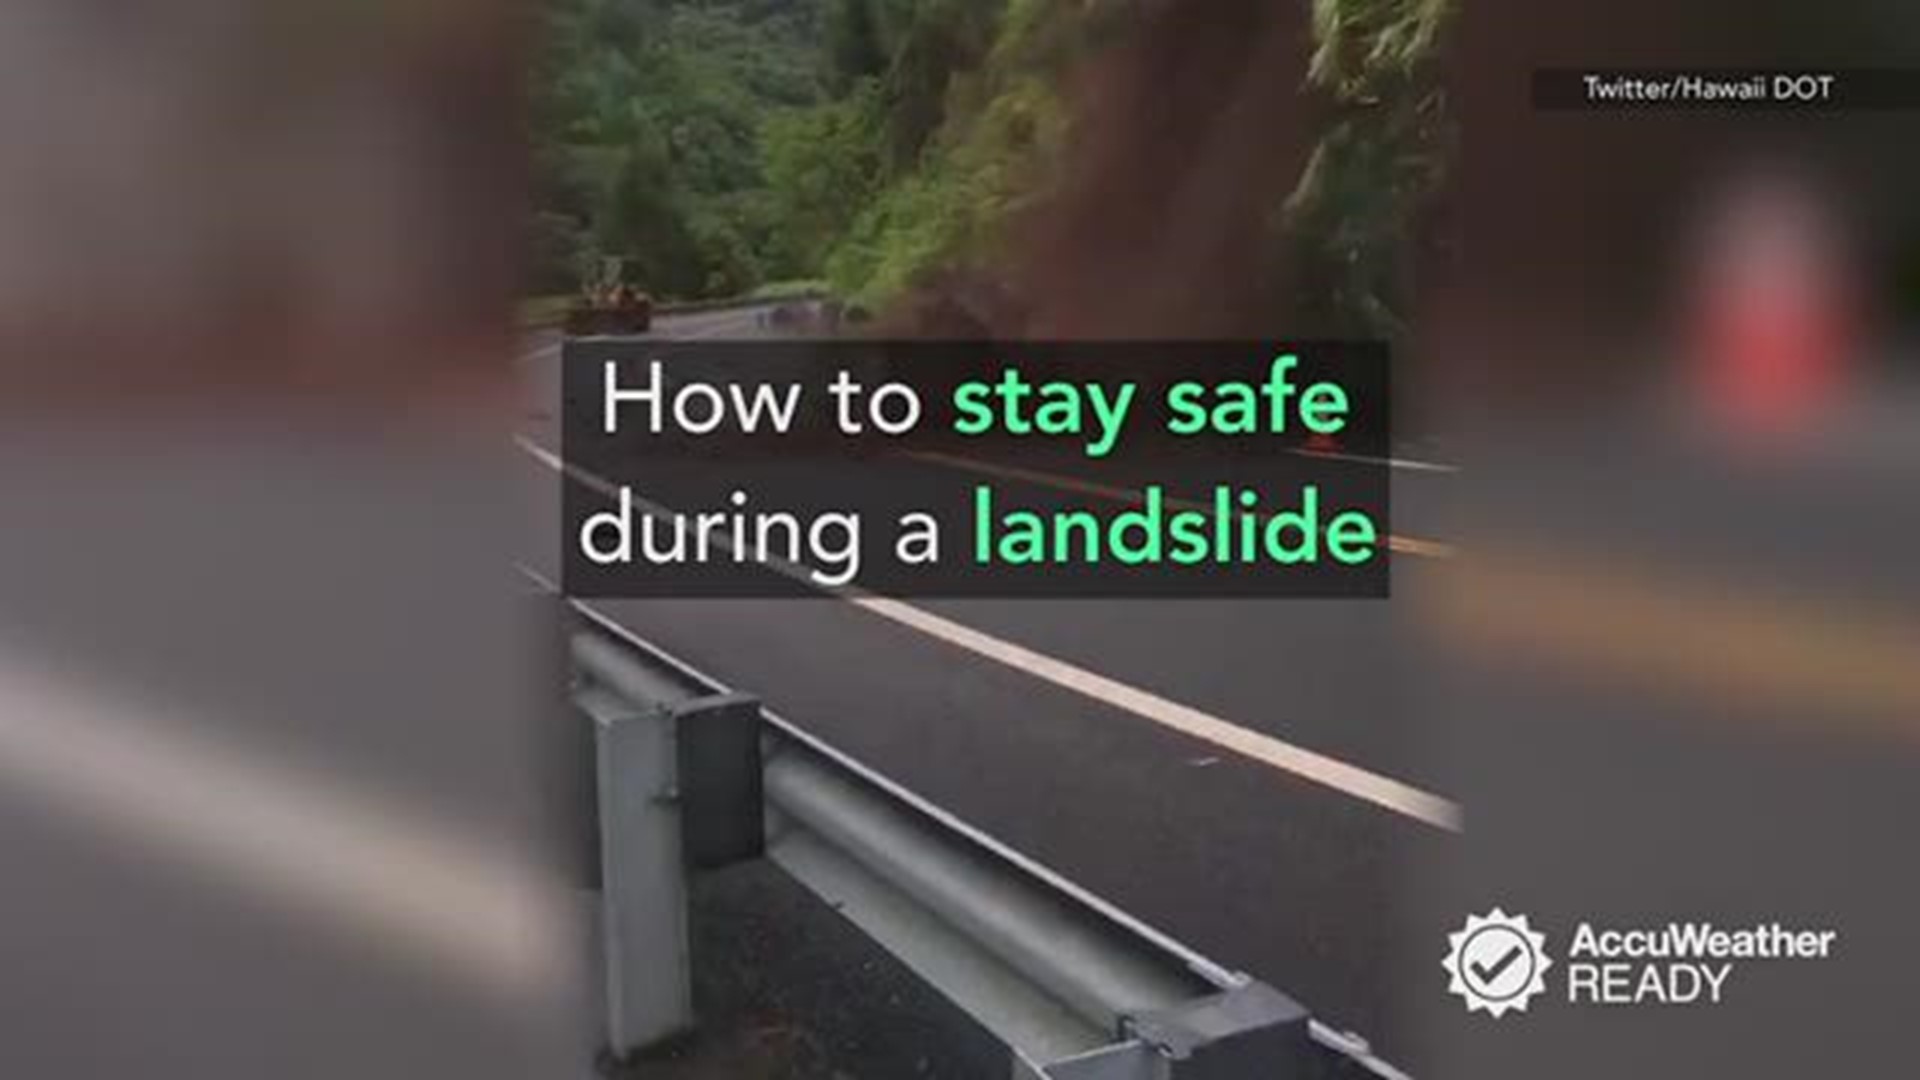 If you're ever faced with a potential landslide and are unable to evacuate, follow these tips to stay safe during the event.